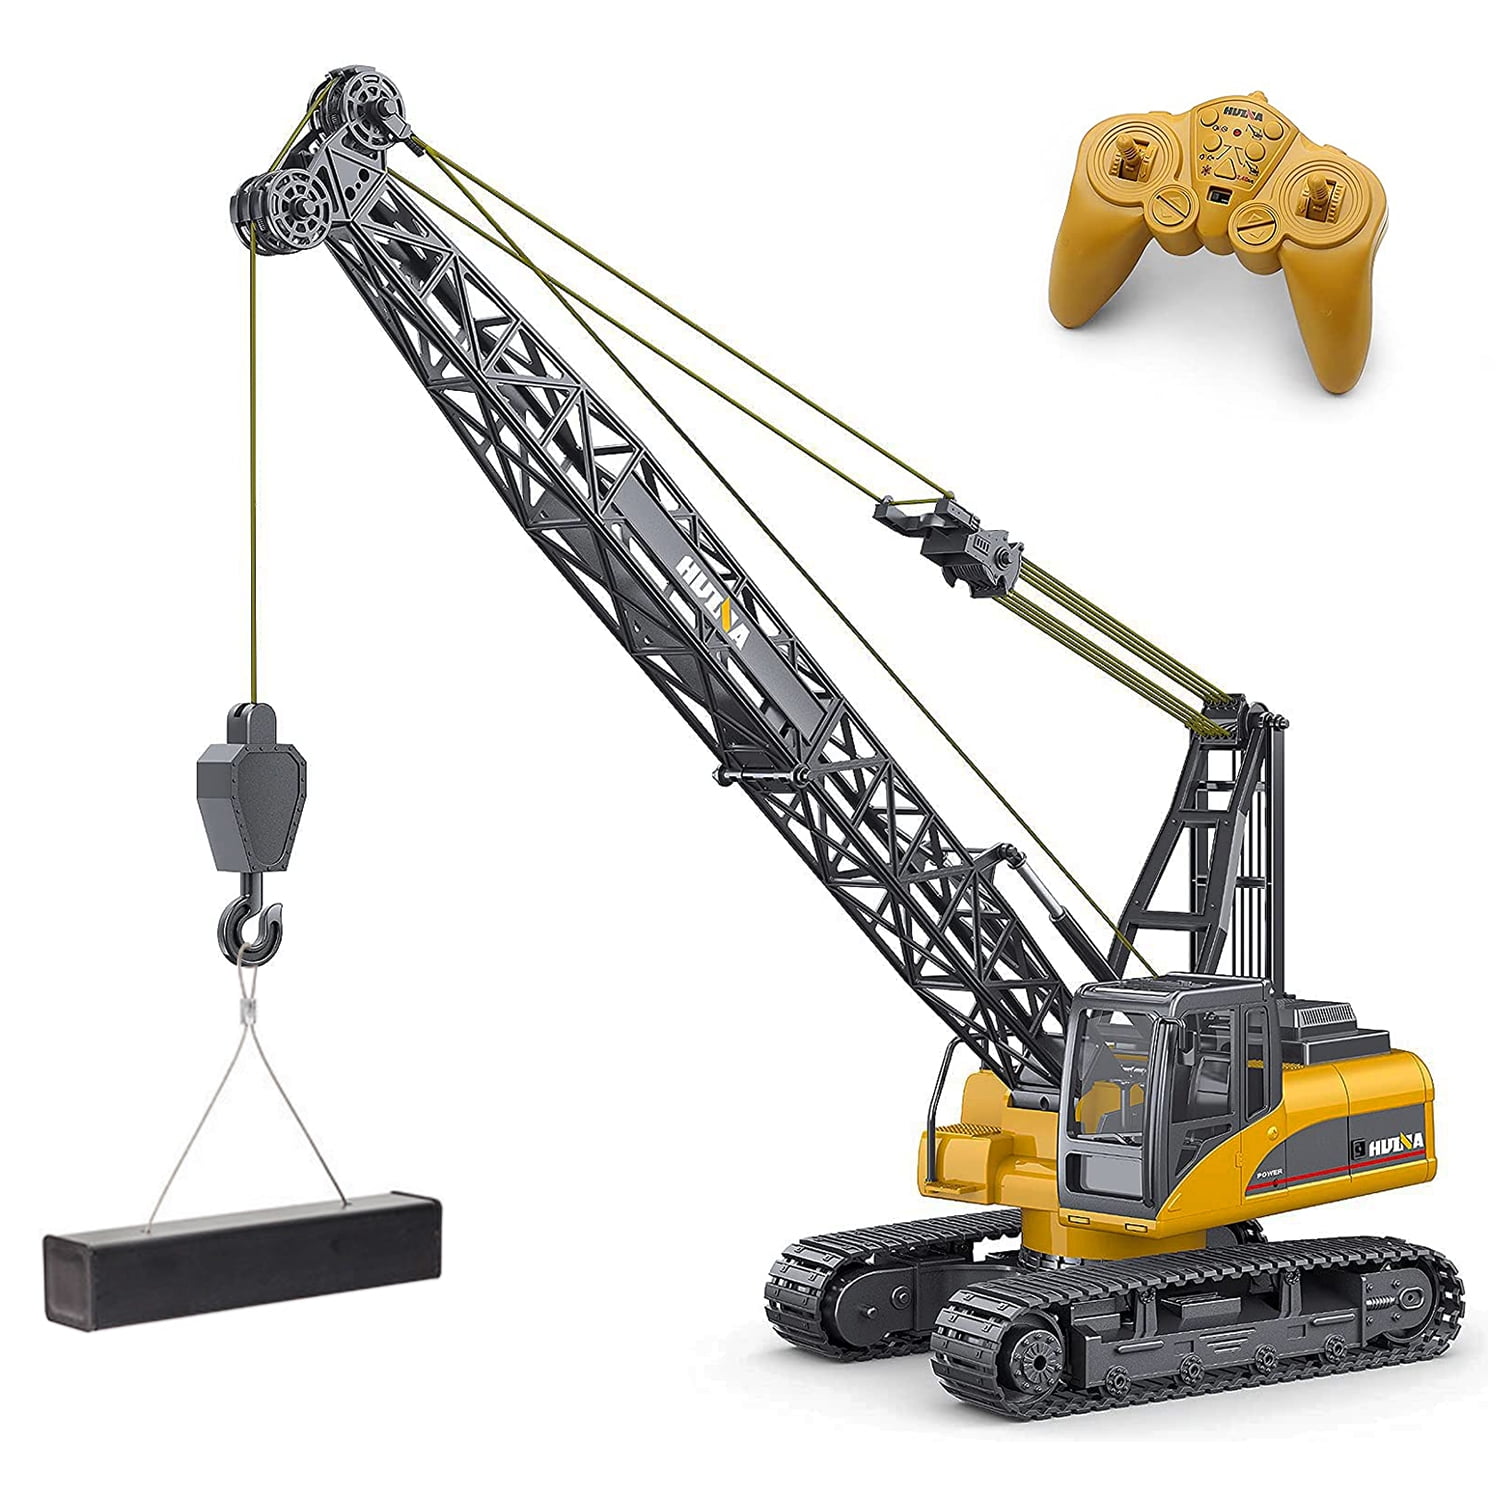 Fisca 1/14 Metal Hook Remote Control Crane Crawler Toys for Kids